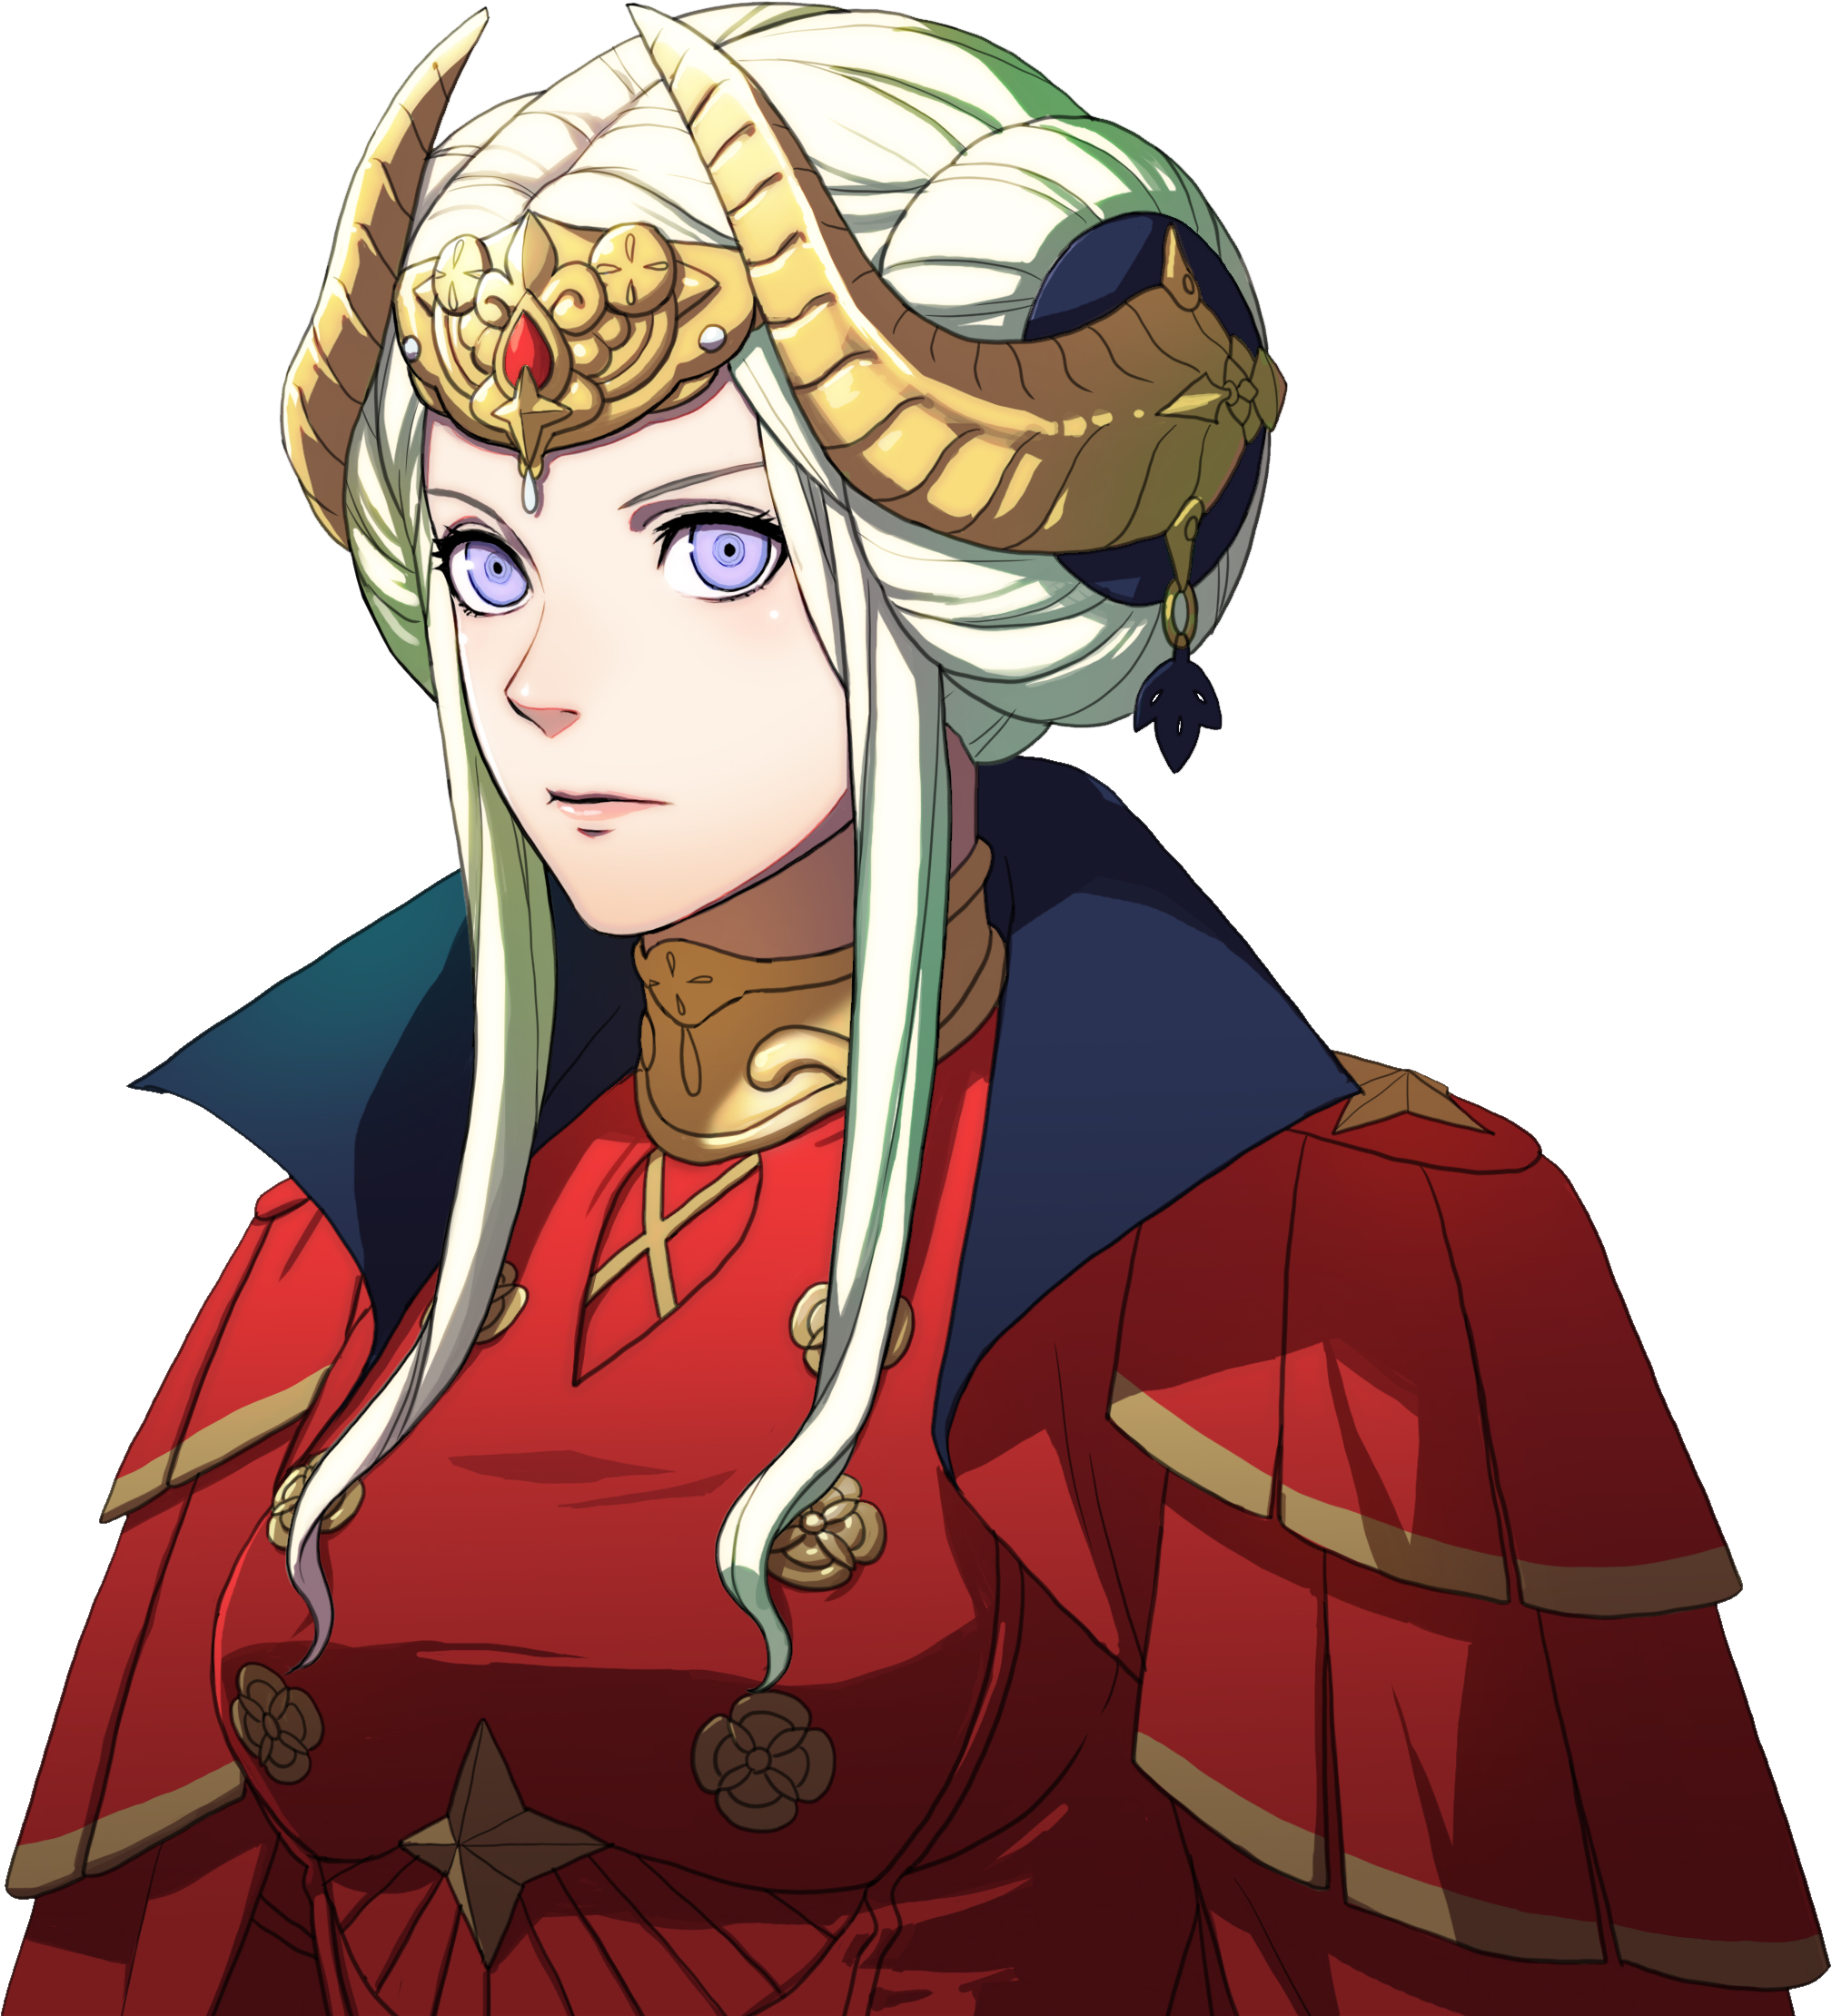 Edelgard's 'Emperor' portrait from Three Houses. A shoulders-and-up-picture of the same woman, wearing red armor and a red cloak.